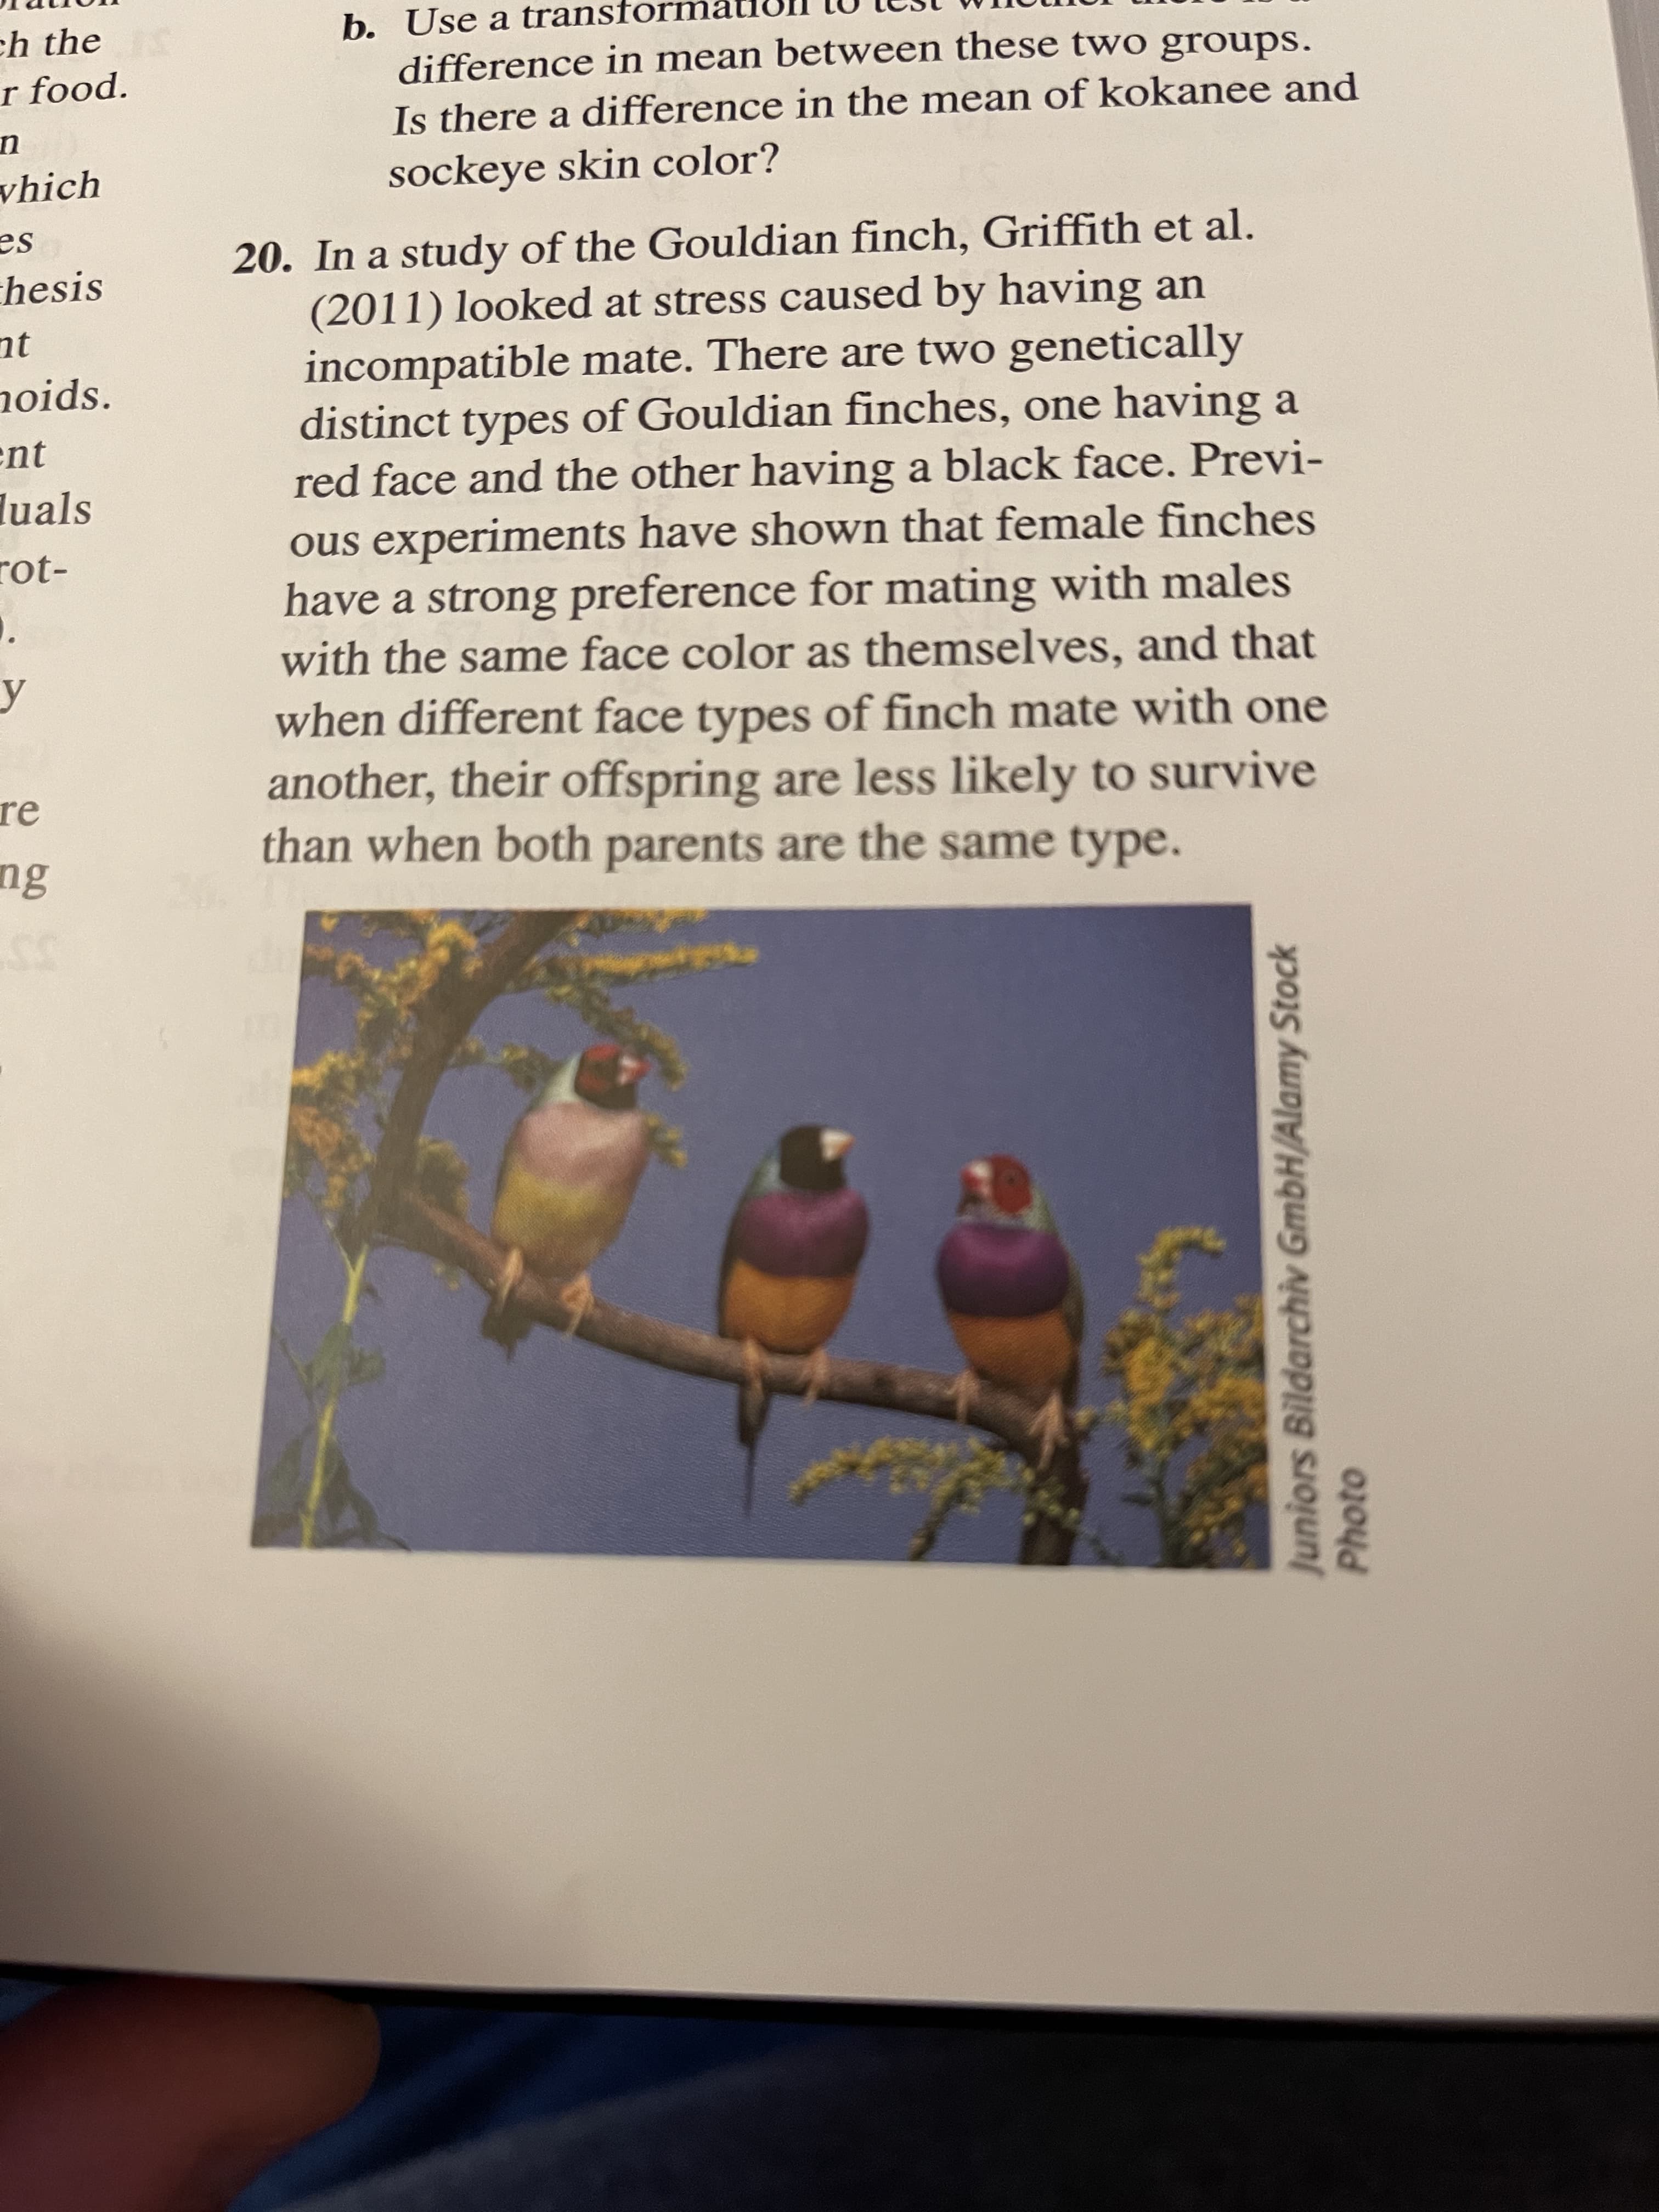 20. In a study of the Go
(2011) looked at stress caused by having an
incompatible mate. There are two genetically
distinct types of Gouldian finches, one having a
red face and the other having a black face. Previ-
ous experiments have shown that female finches
have a strong preference for mating with males
with the same face color as themselves, and that
when different face types of finch mate with one
another, their offspring are less likely to survive
than when both parents are the same type.
